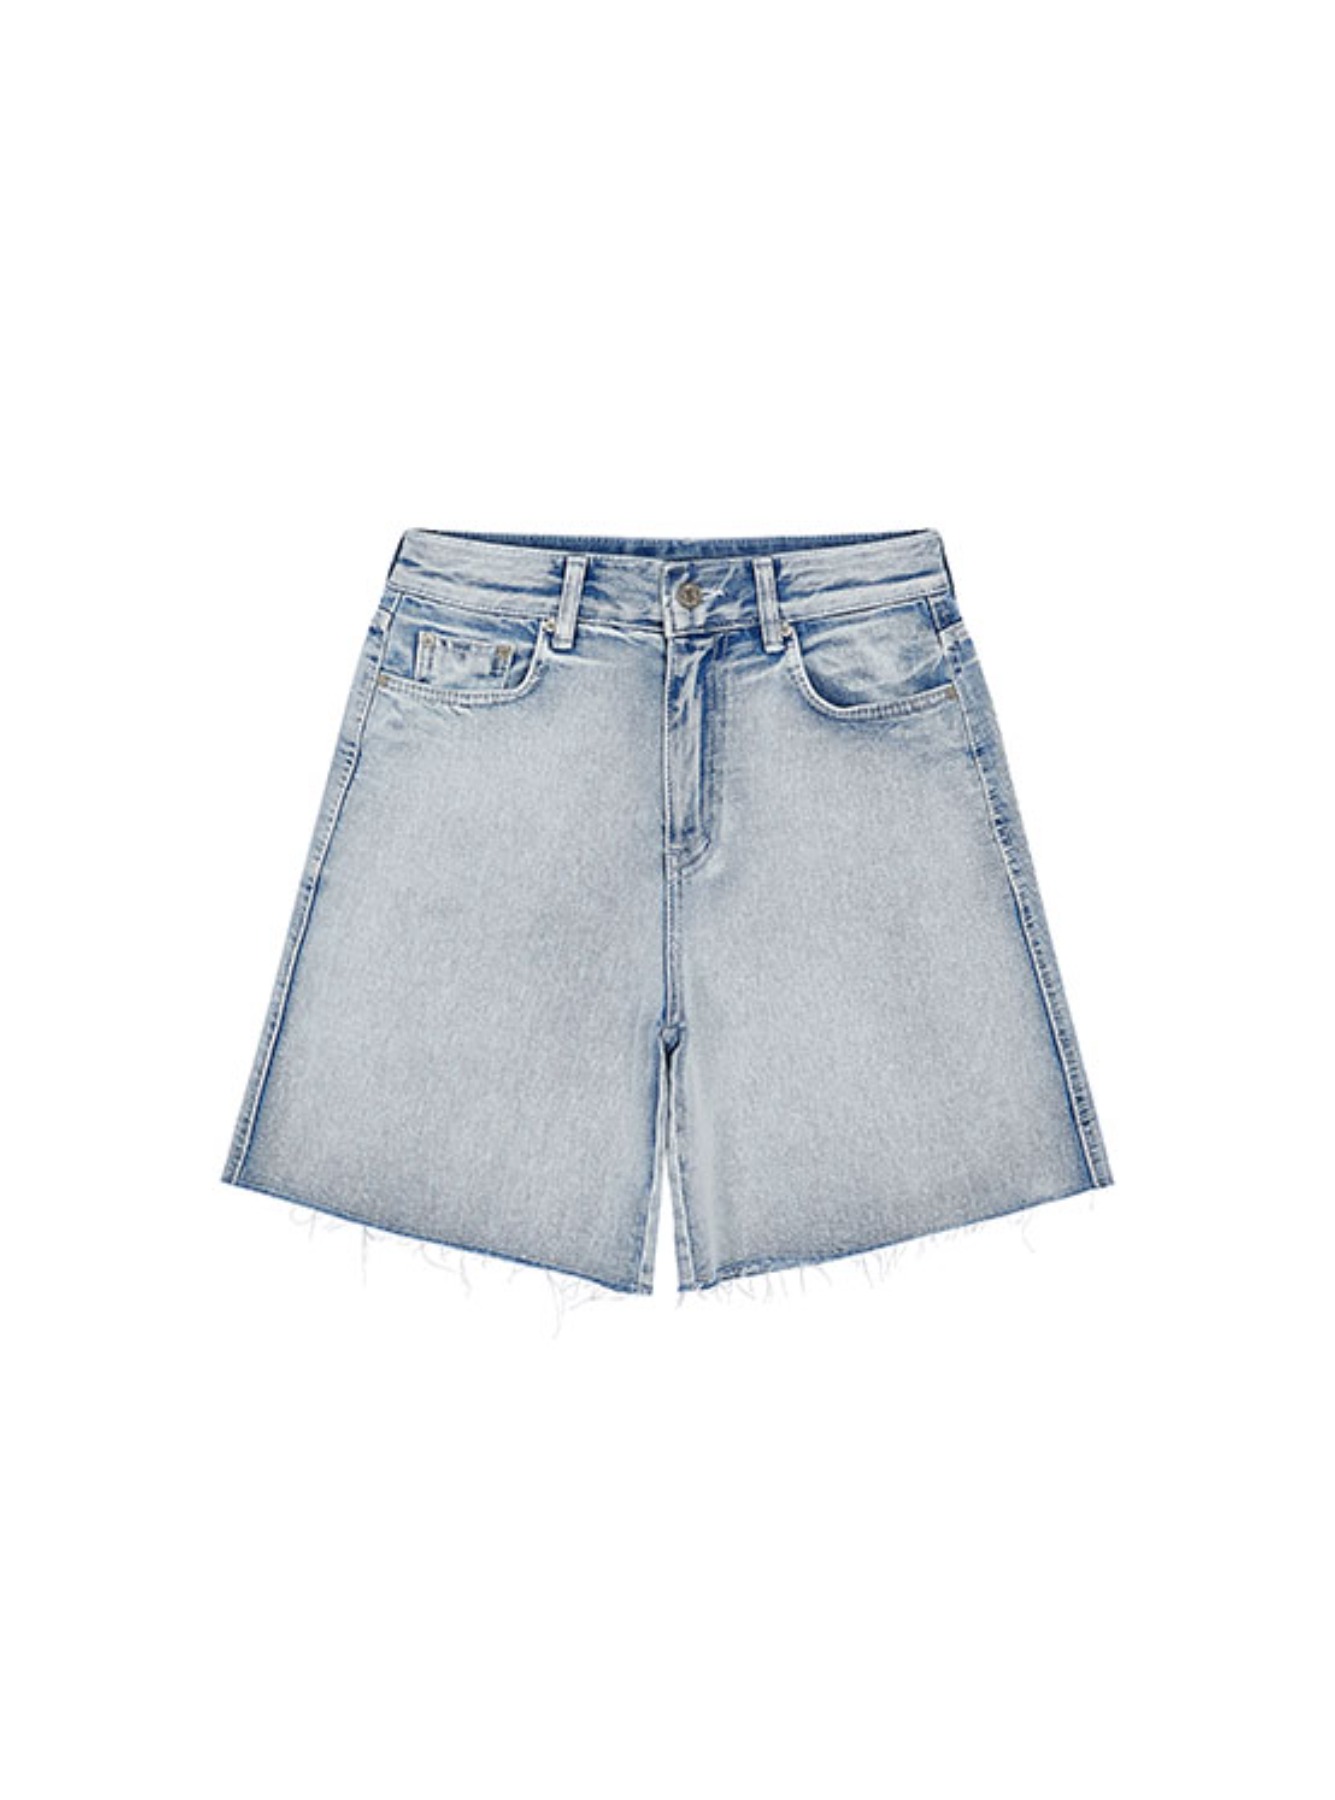 All Brush Washing Shorts Jeans in L/Blue VJ2ML198-AM